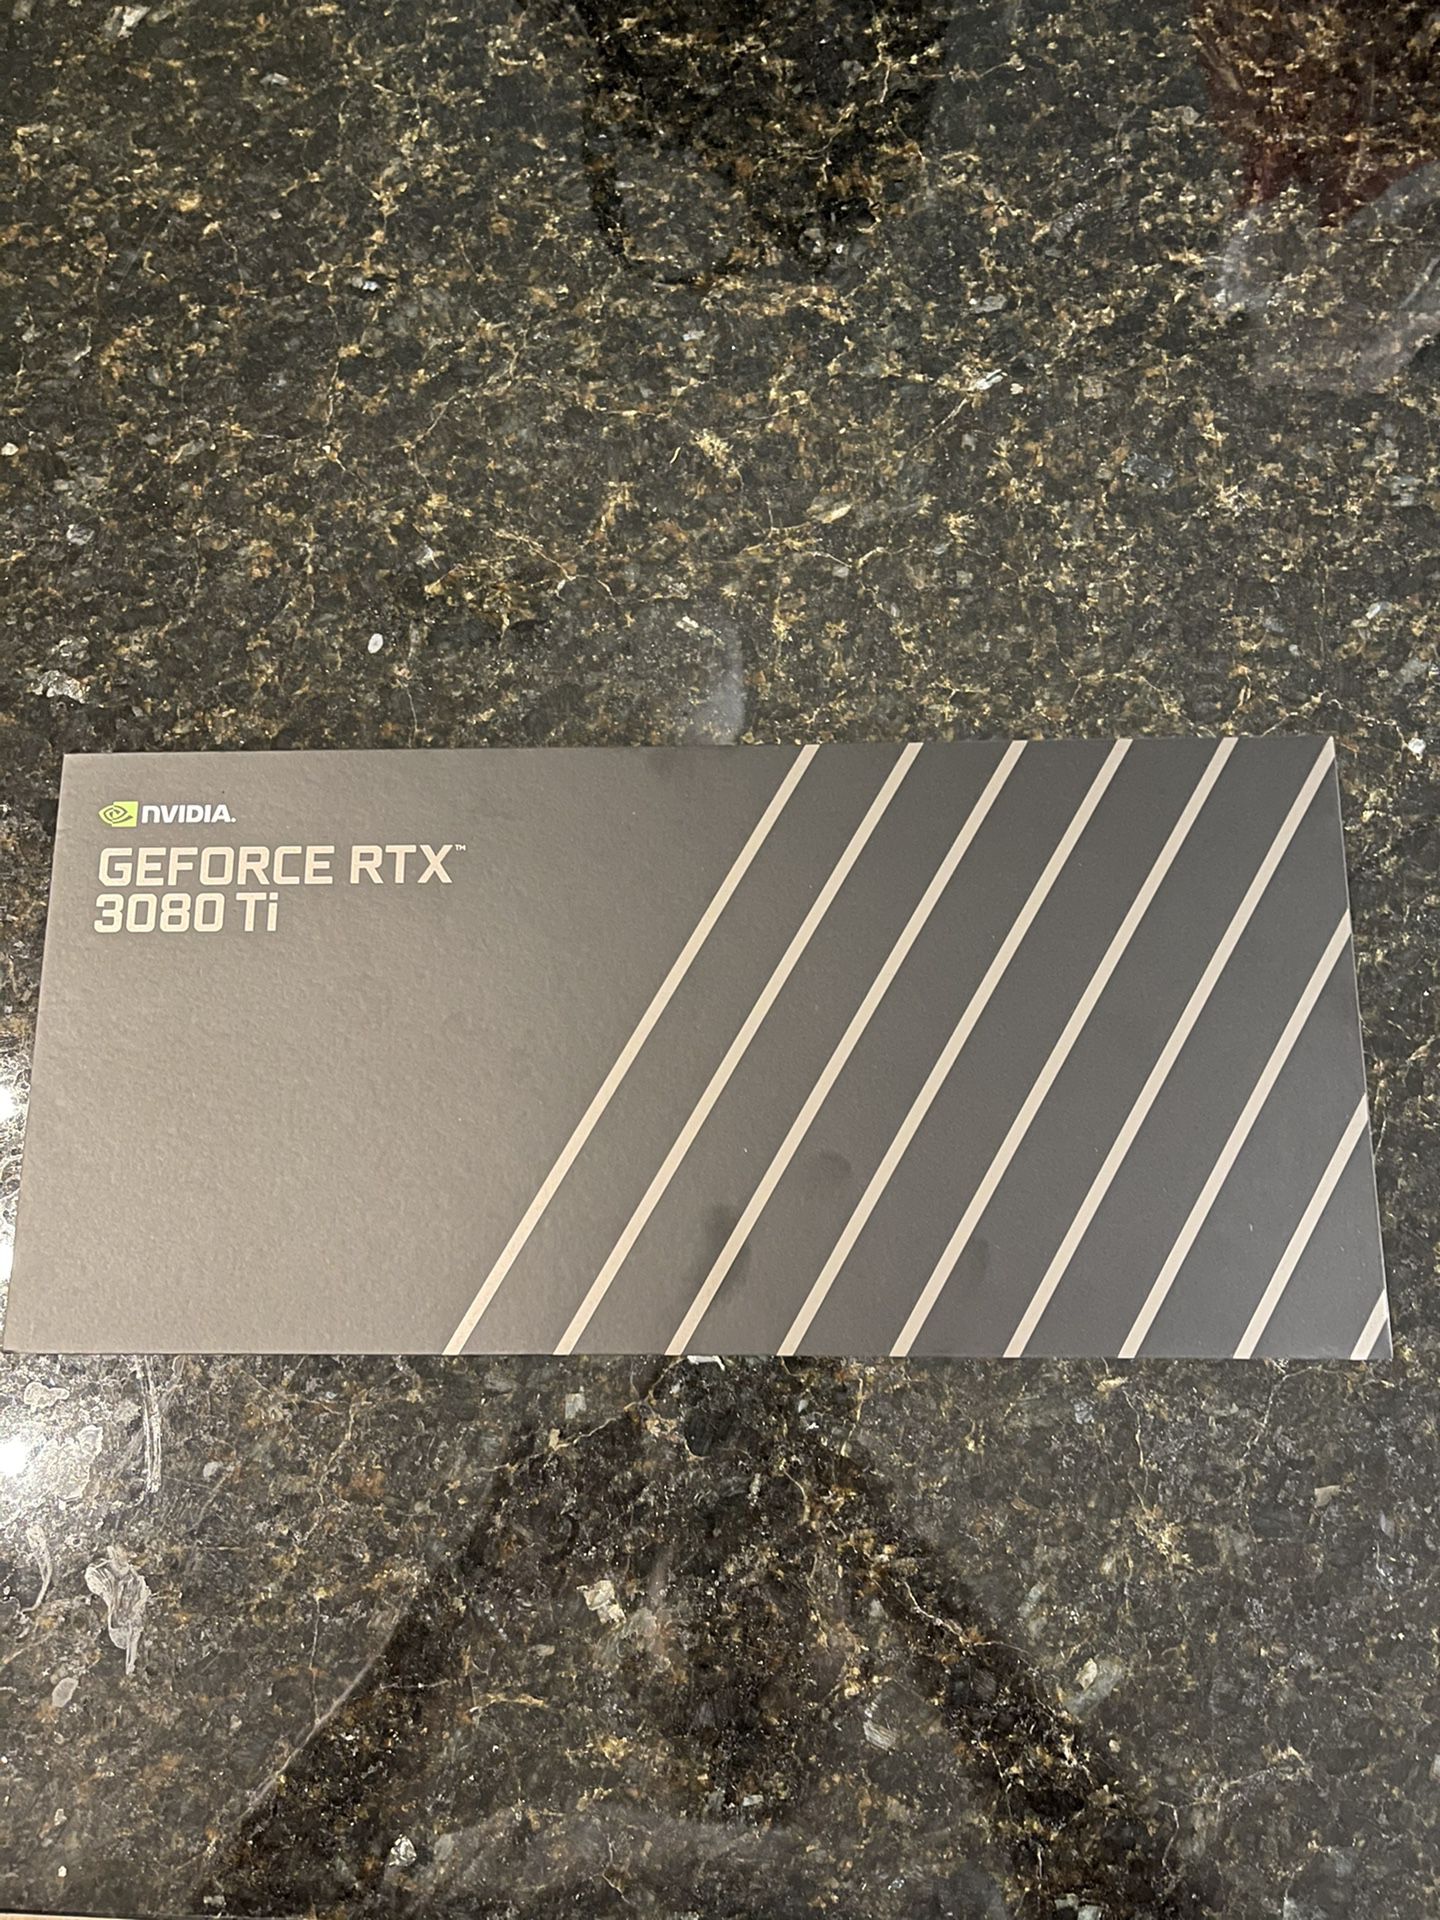 Selling NVIDIA GEFORCE RTX 3080 Ti Founders Edition. Asking $1750. Brand new & unopened. Local only.